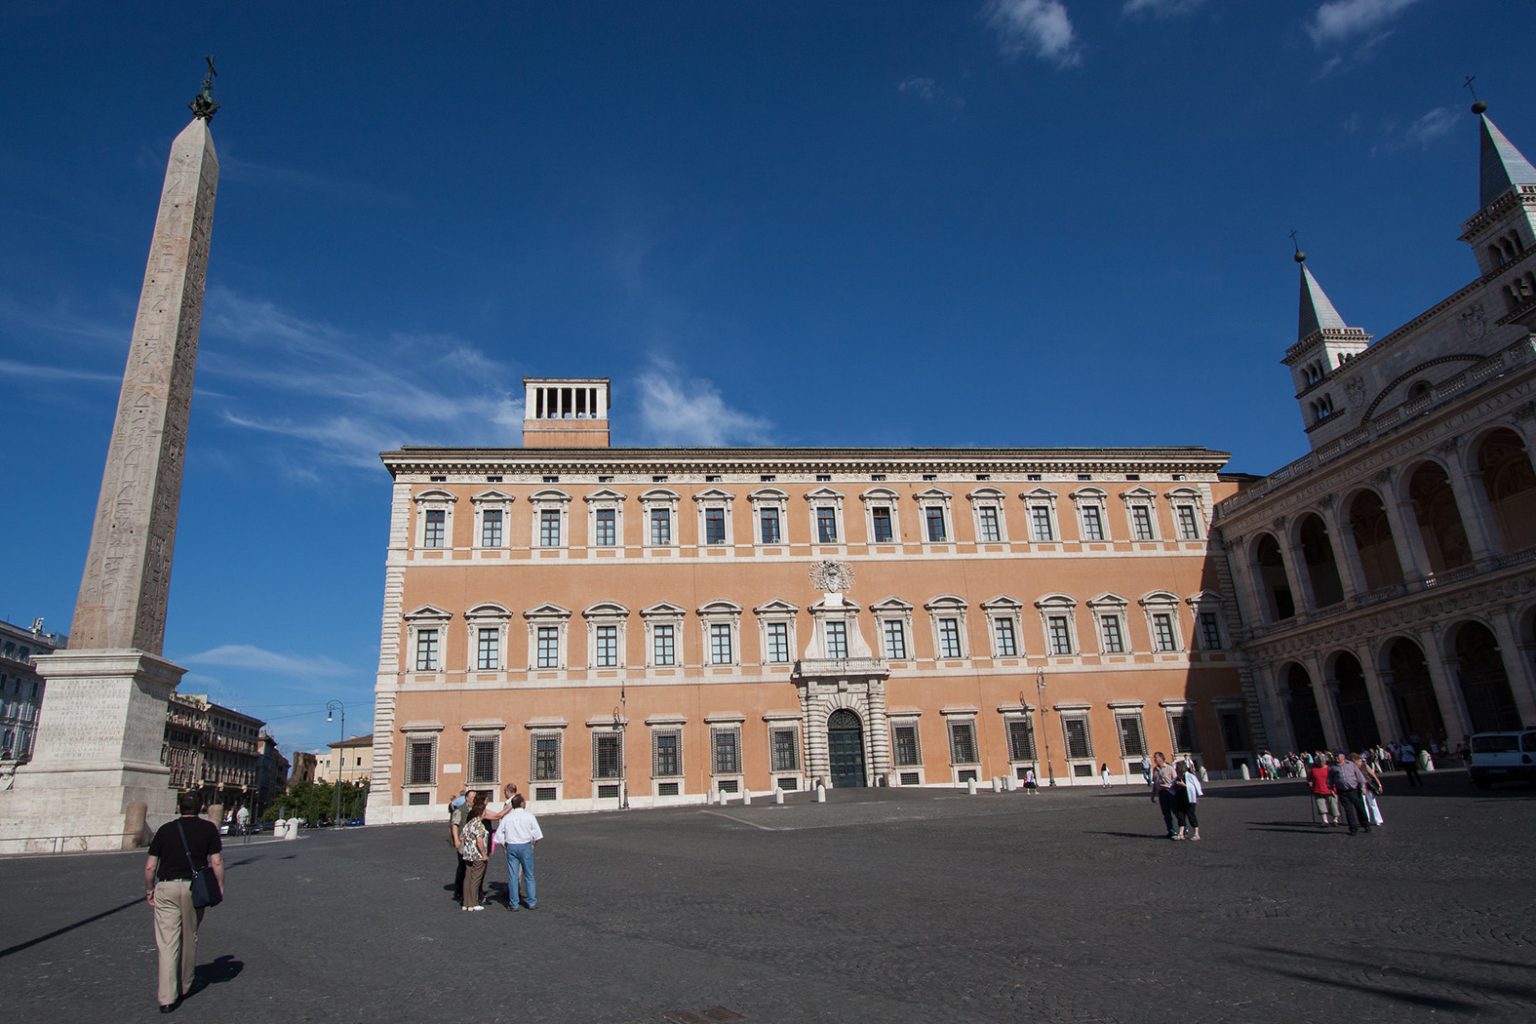 Pope Francis designates Lateran Palace a museum and cultural site